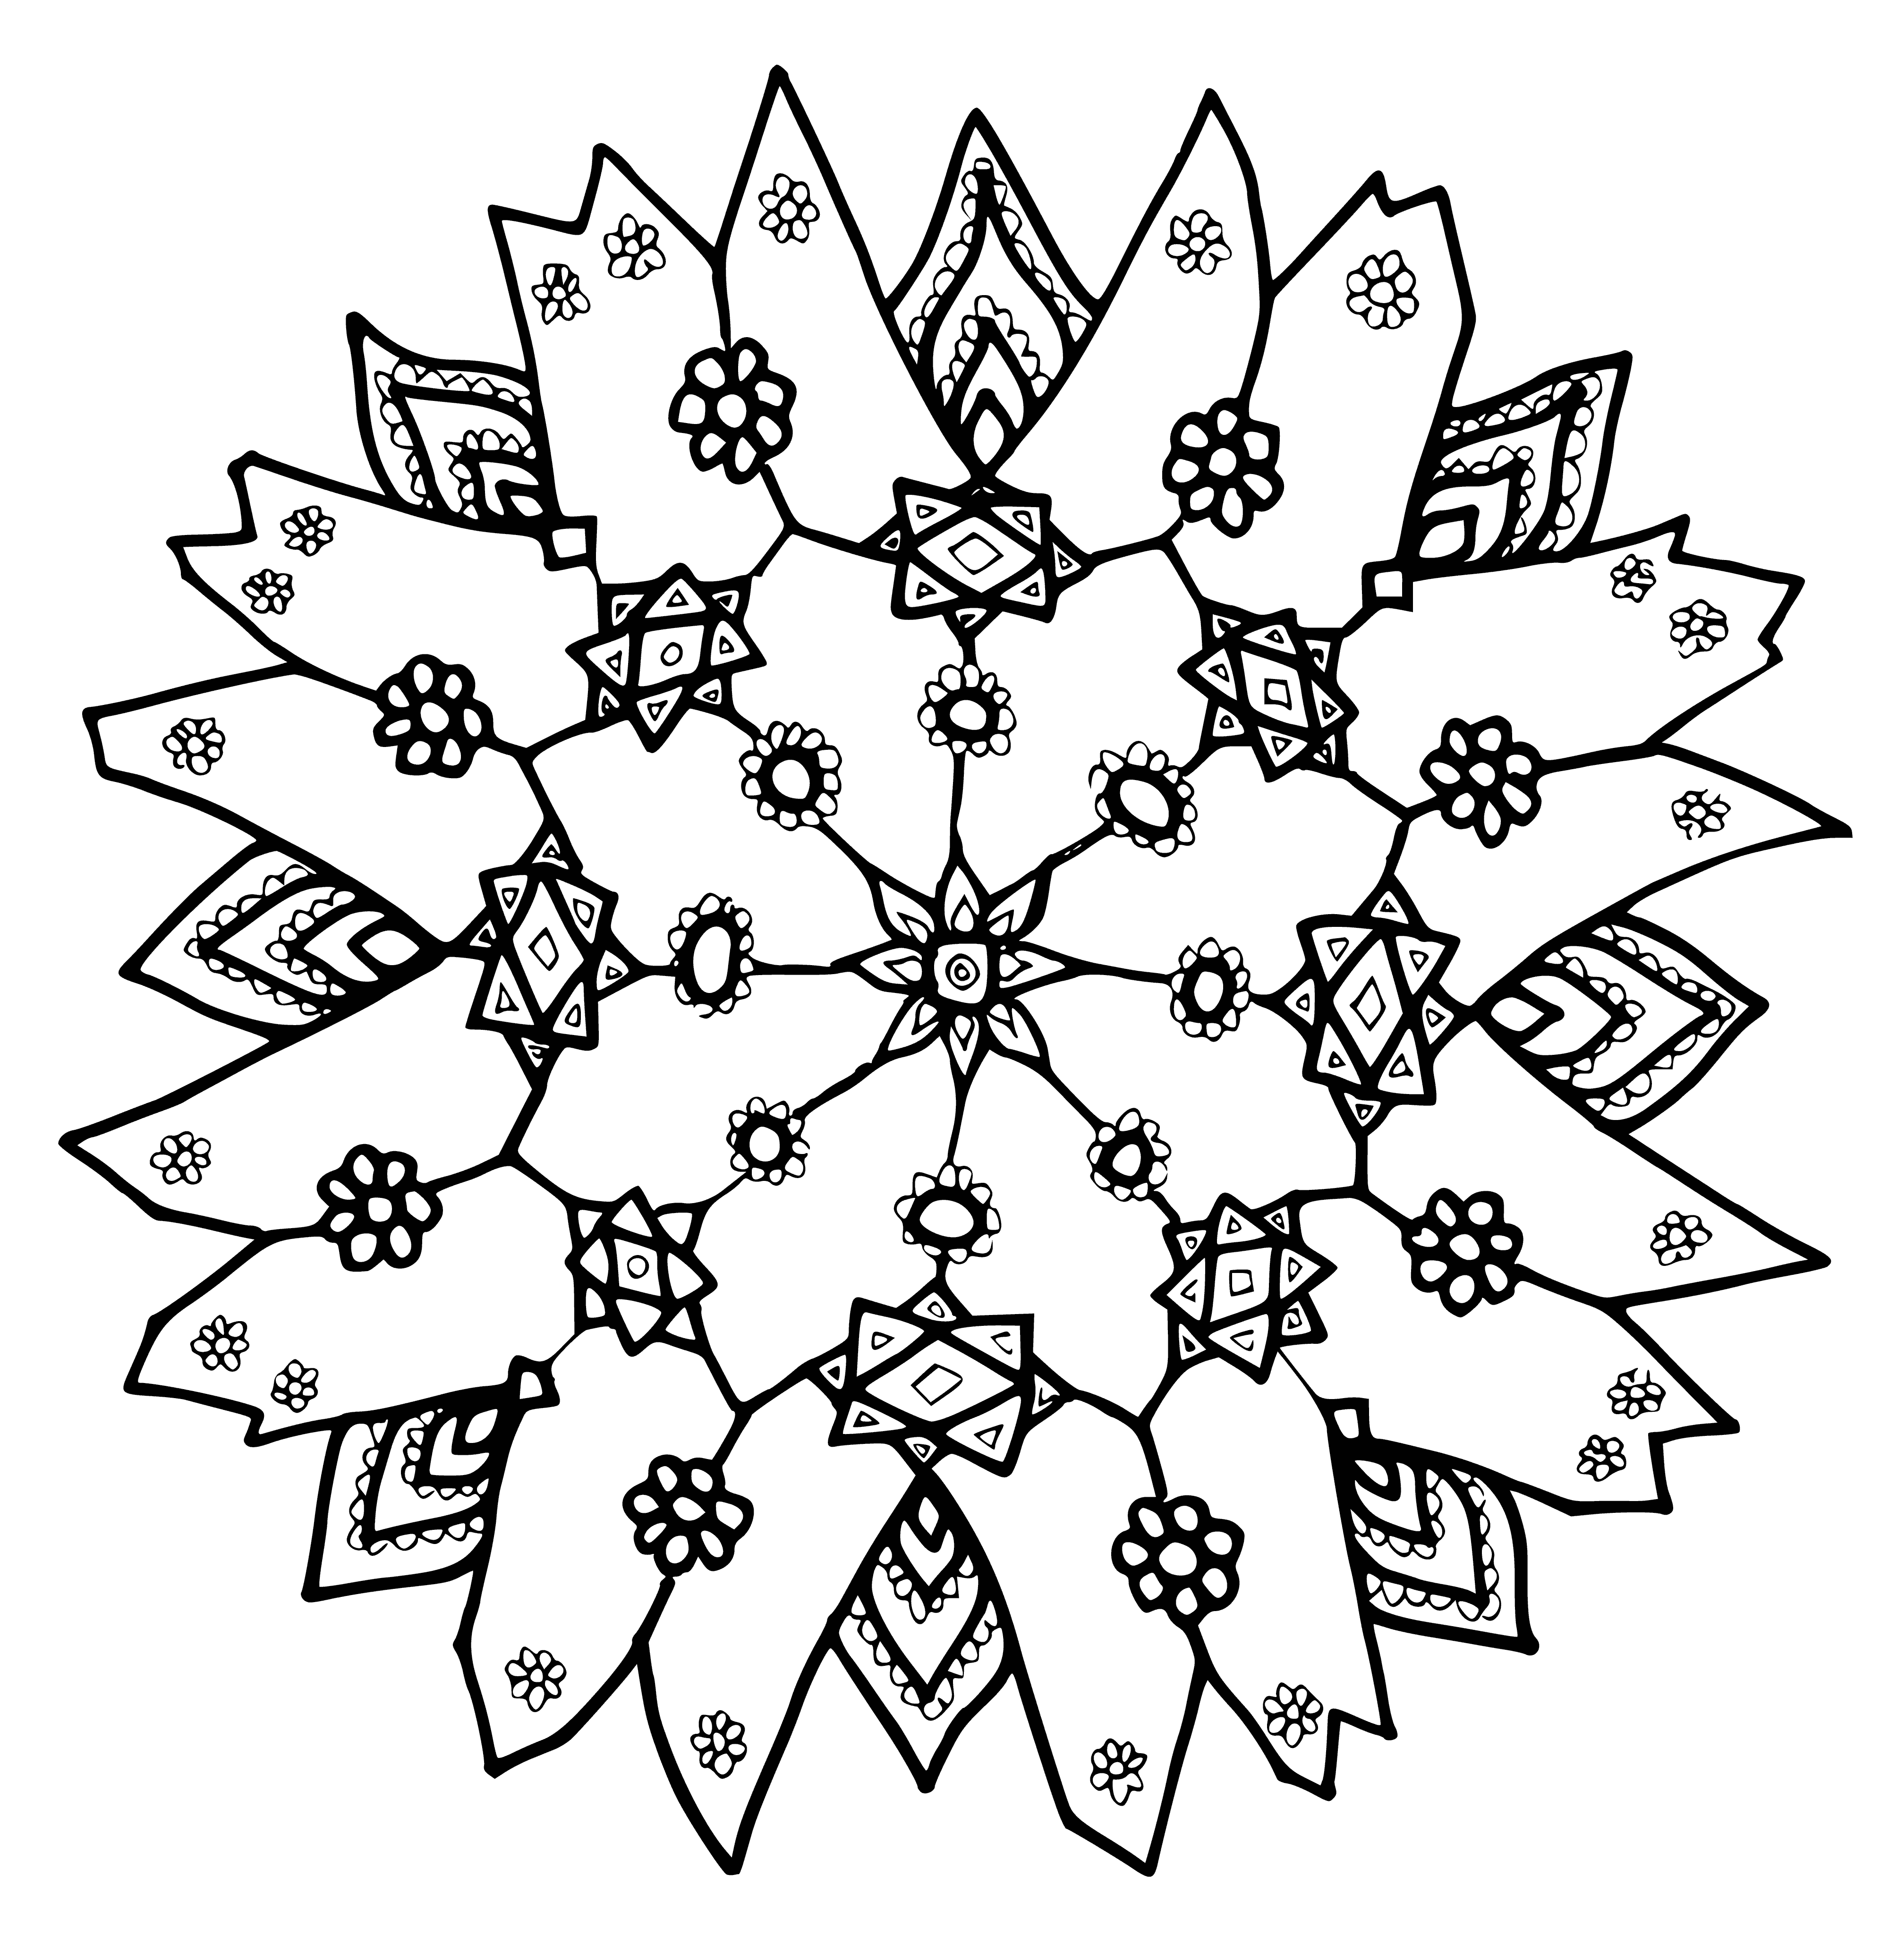 coloring page: A coloring page of a white, symmetrical snowflake with six sides, intricate and beautiful.